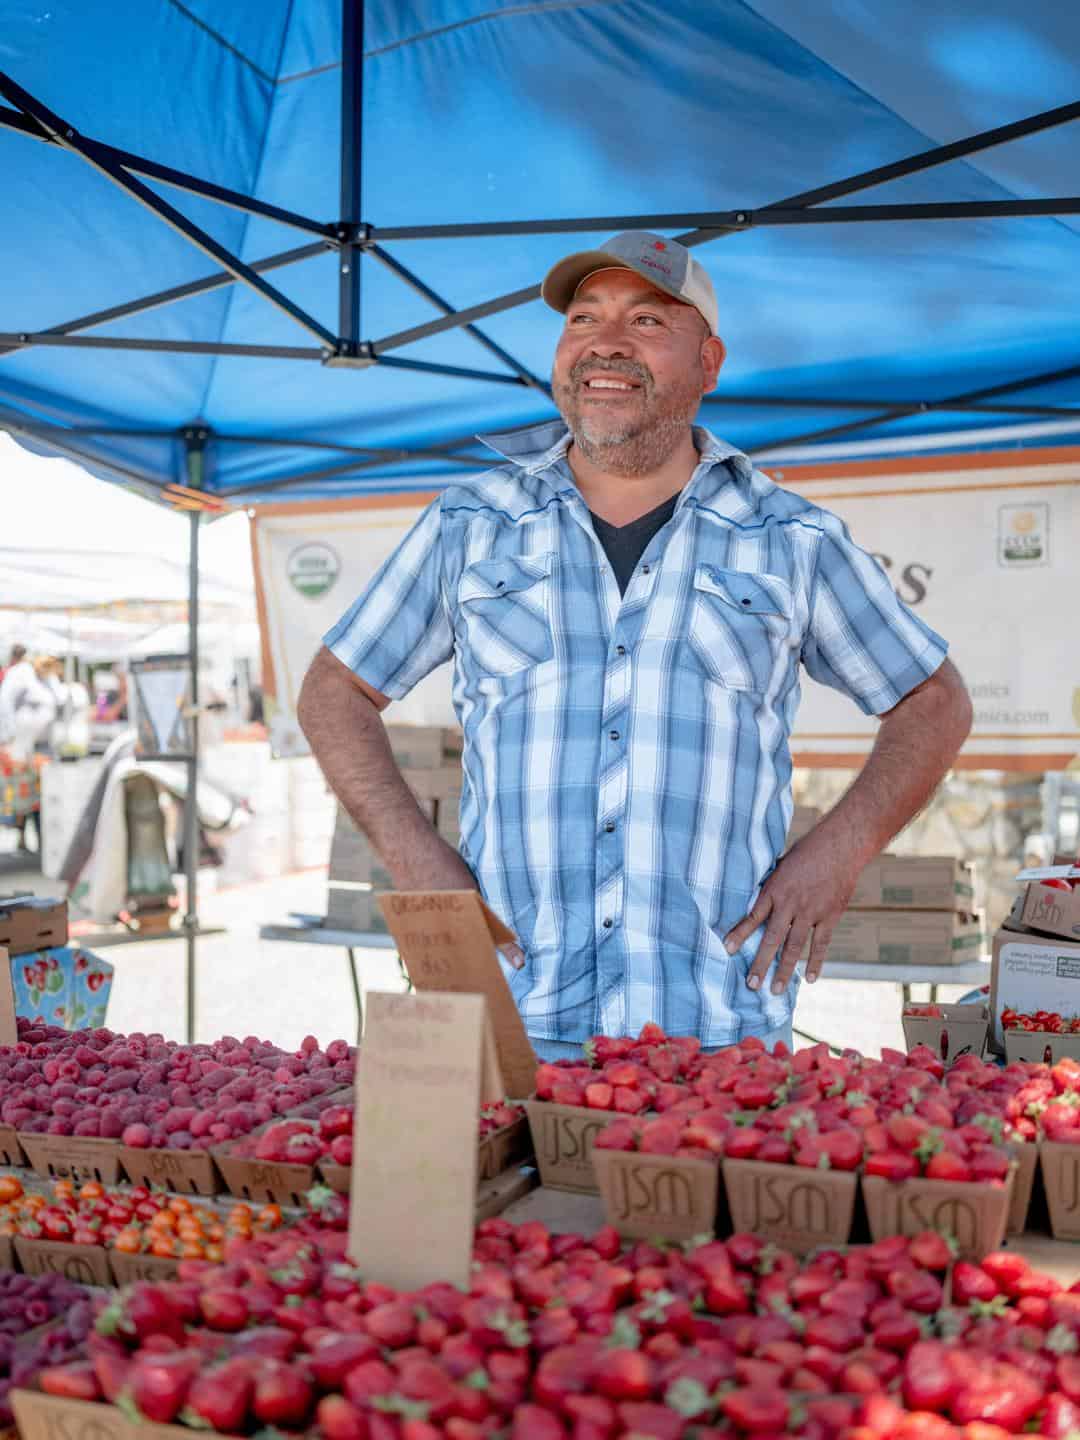 JSM produce at Farmers Market - even small farmers benefit from the CalFresh Market Match.